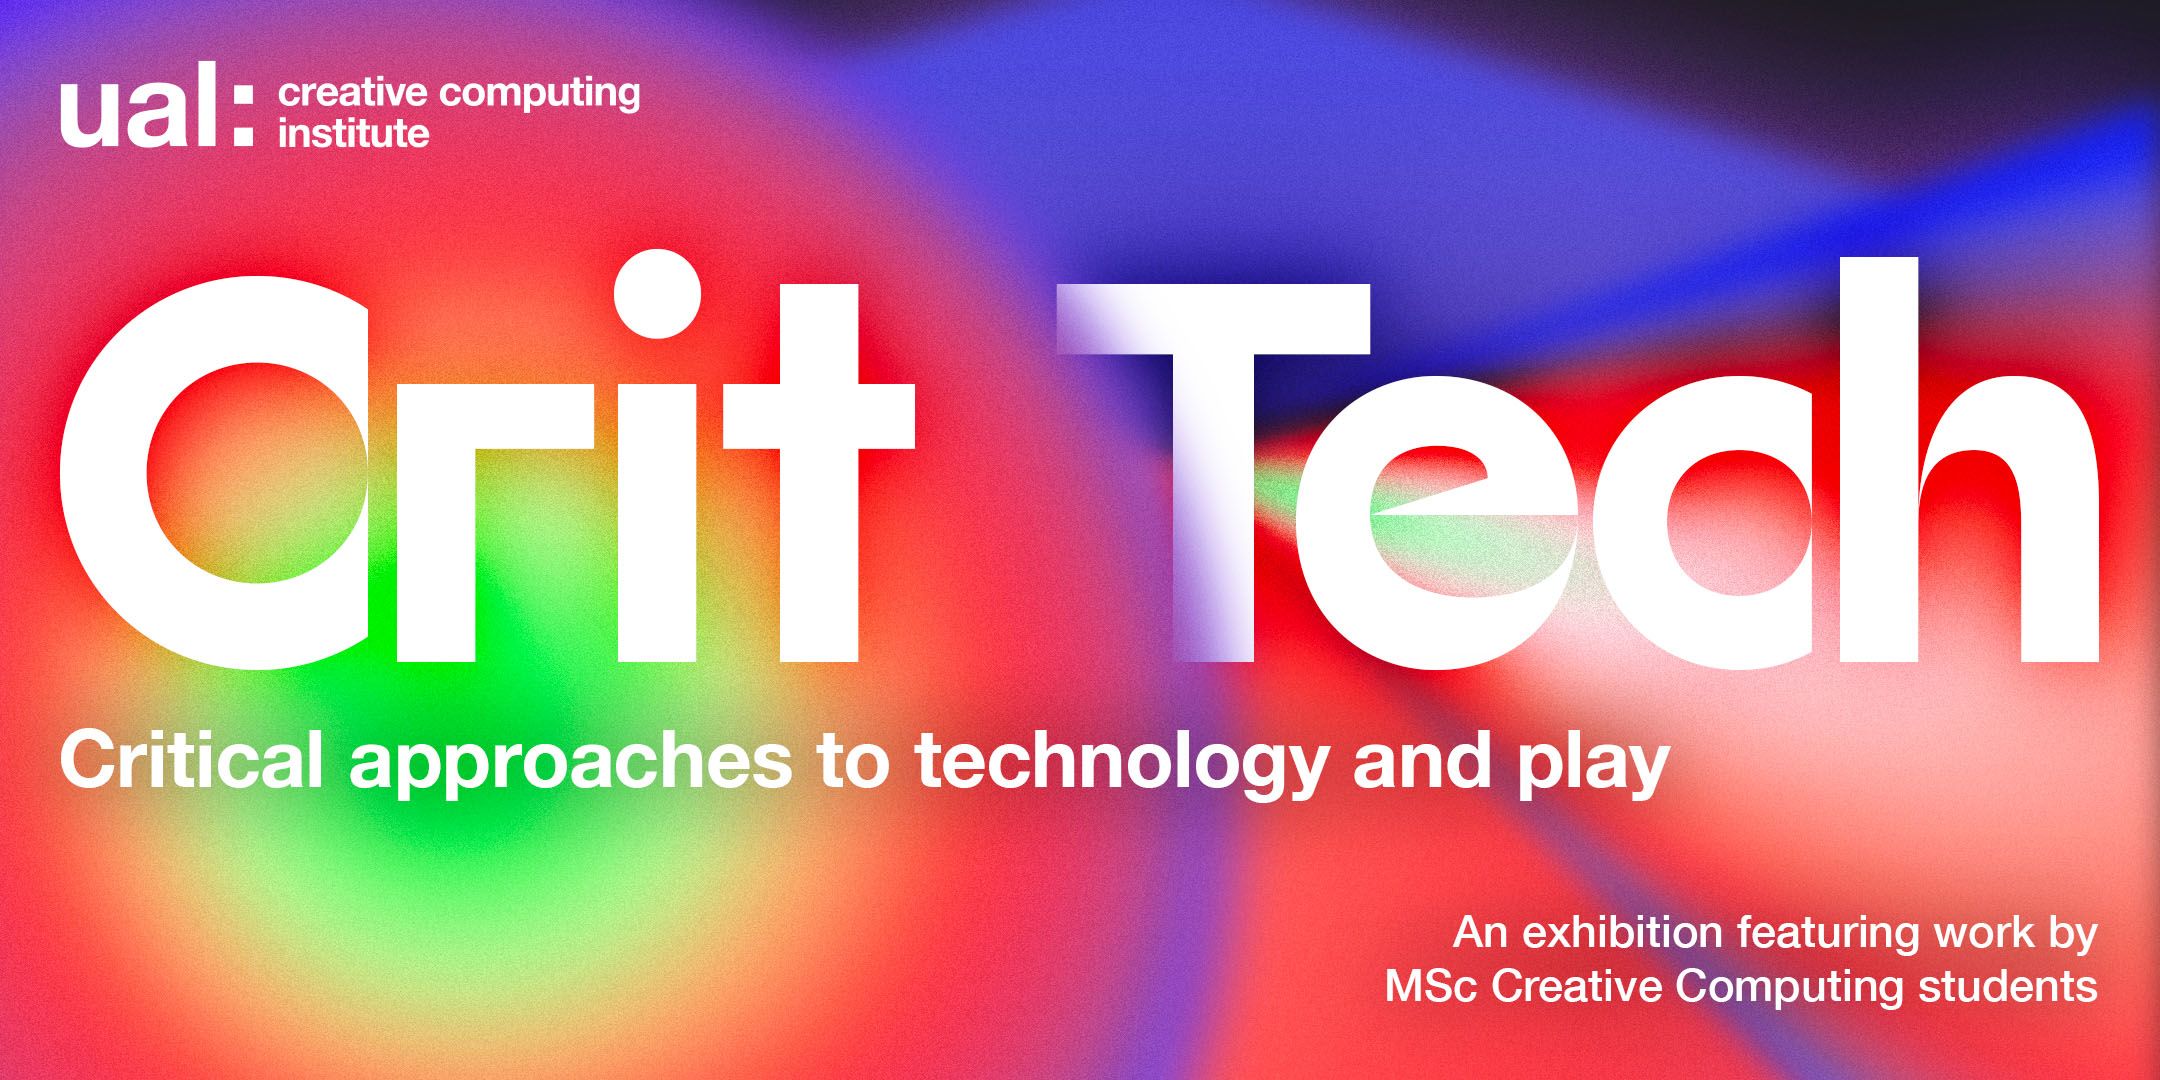 A poster saying 'UAL Creative Computing Institute', Critical approaches to technology and play' 